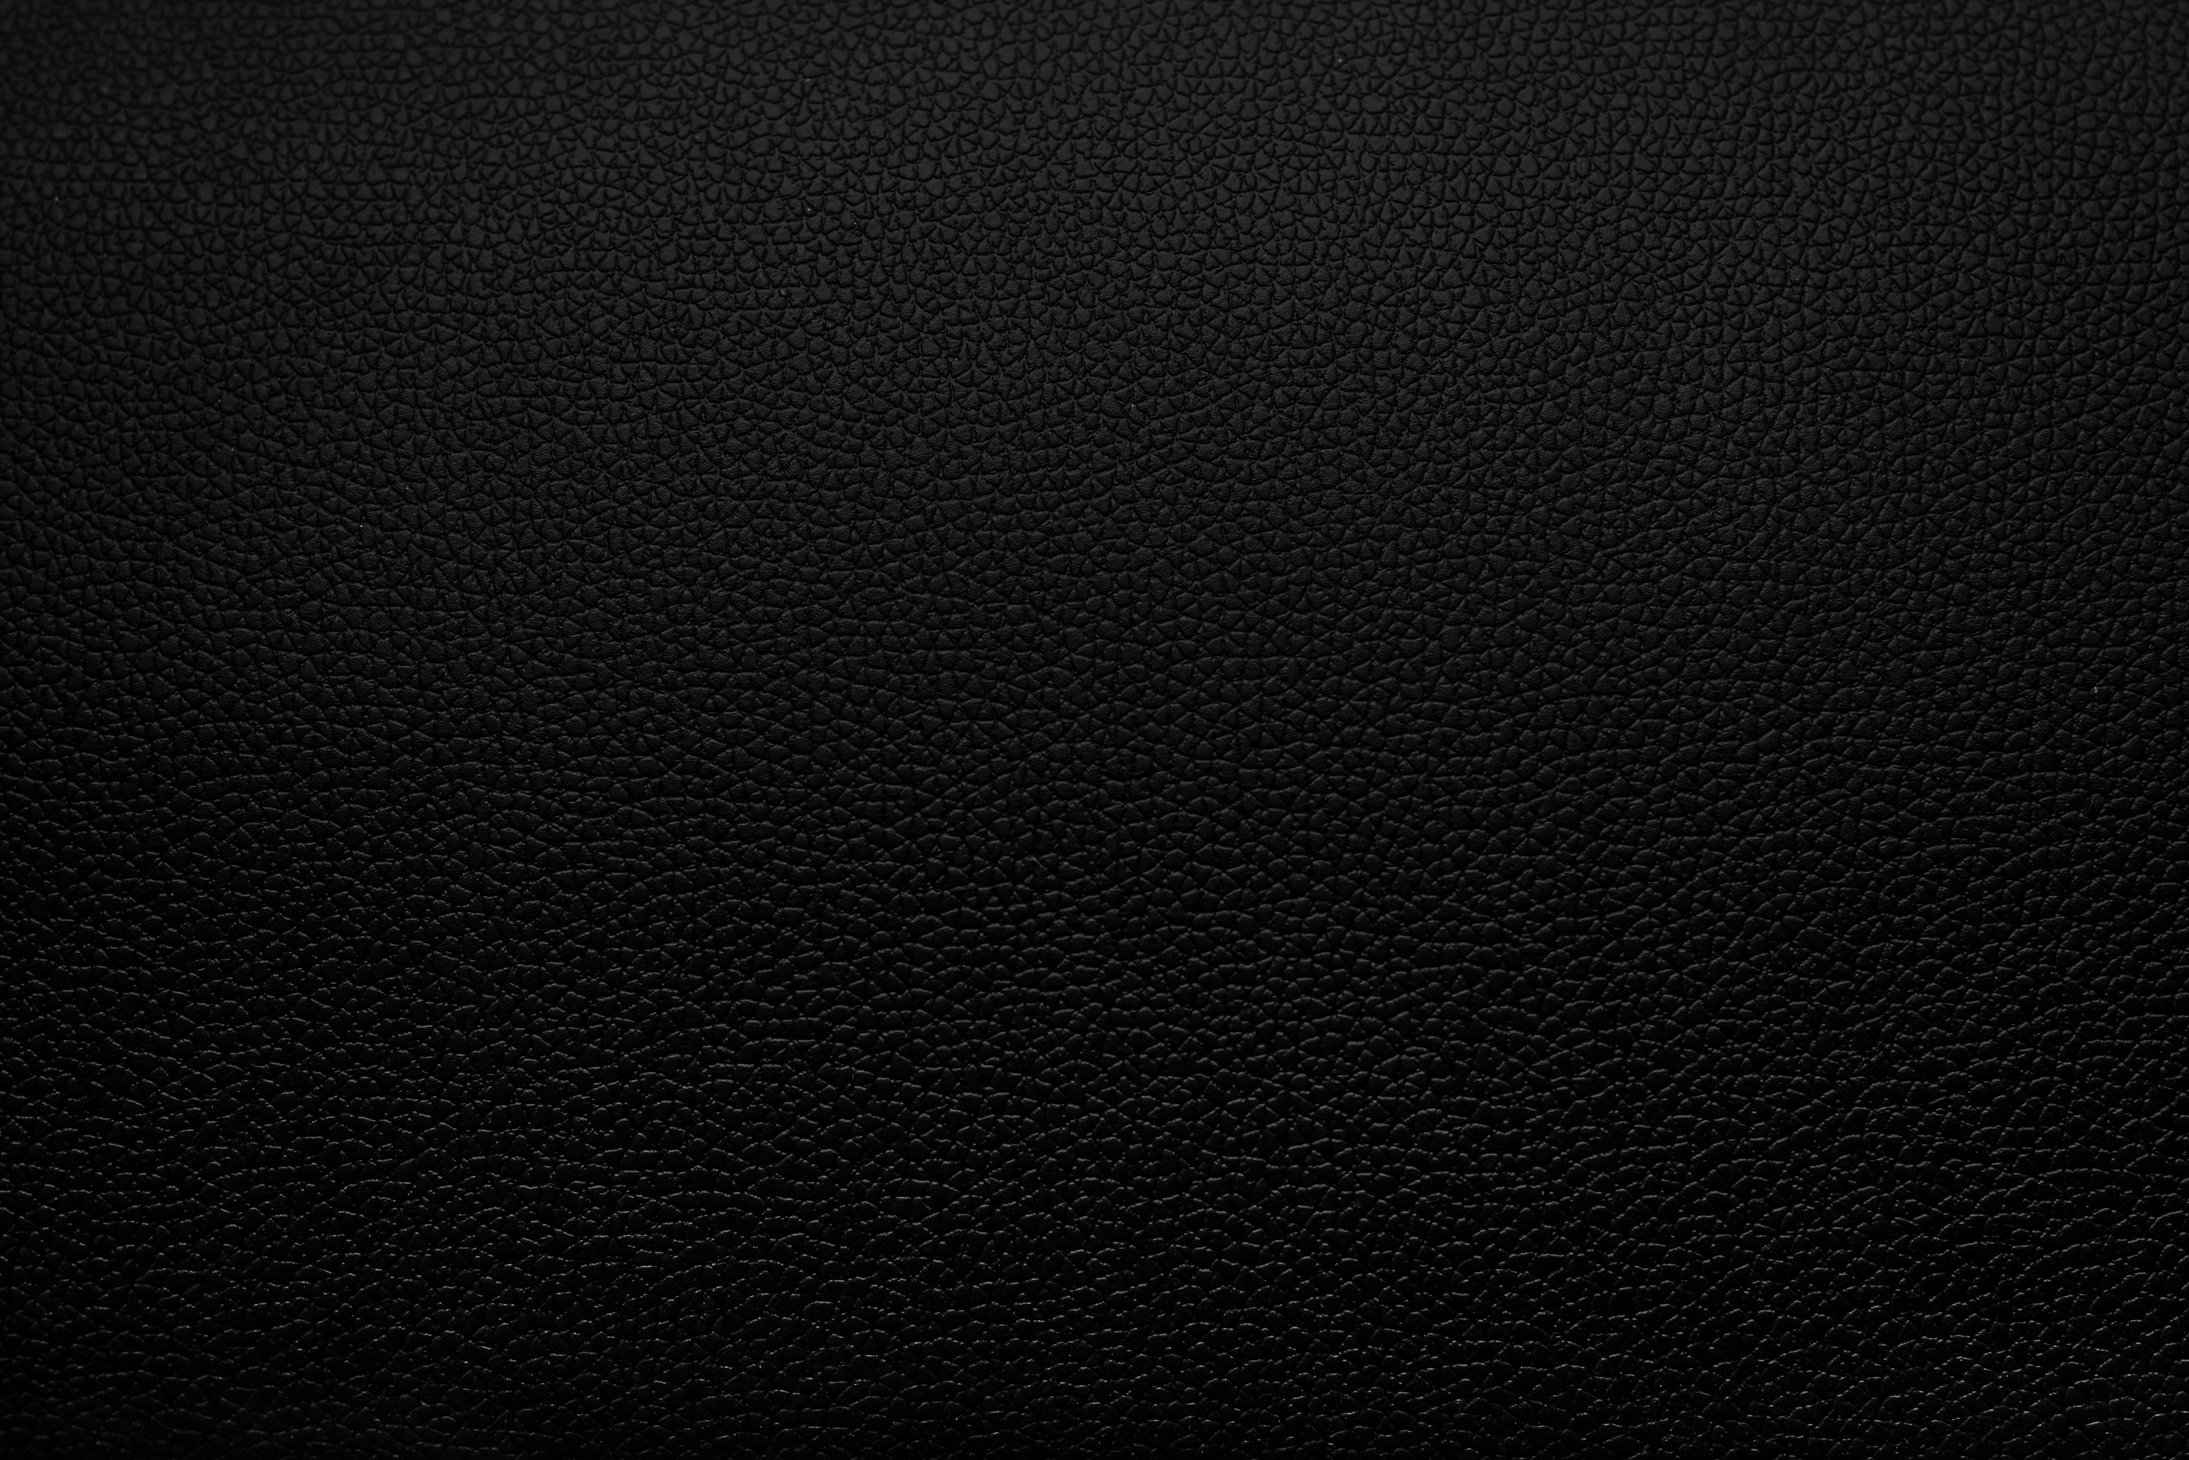 Black leather texture background, Leather background.